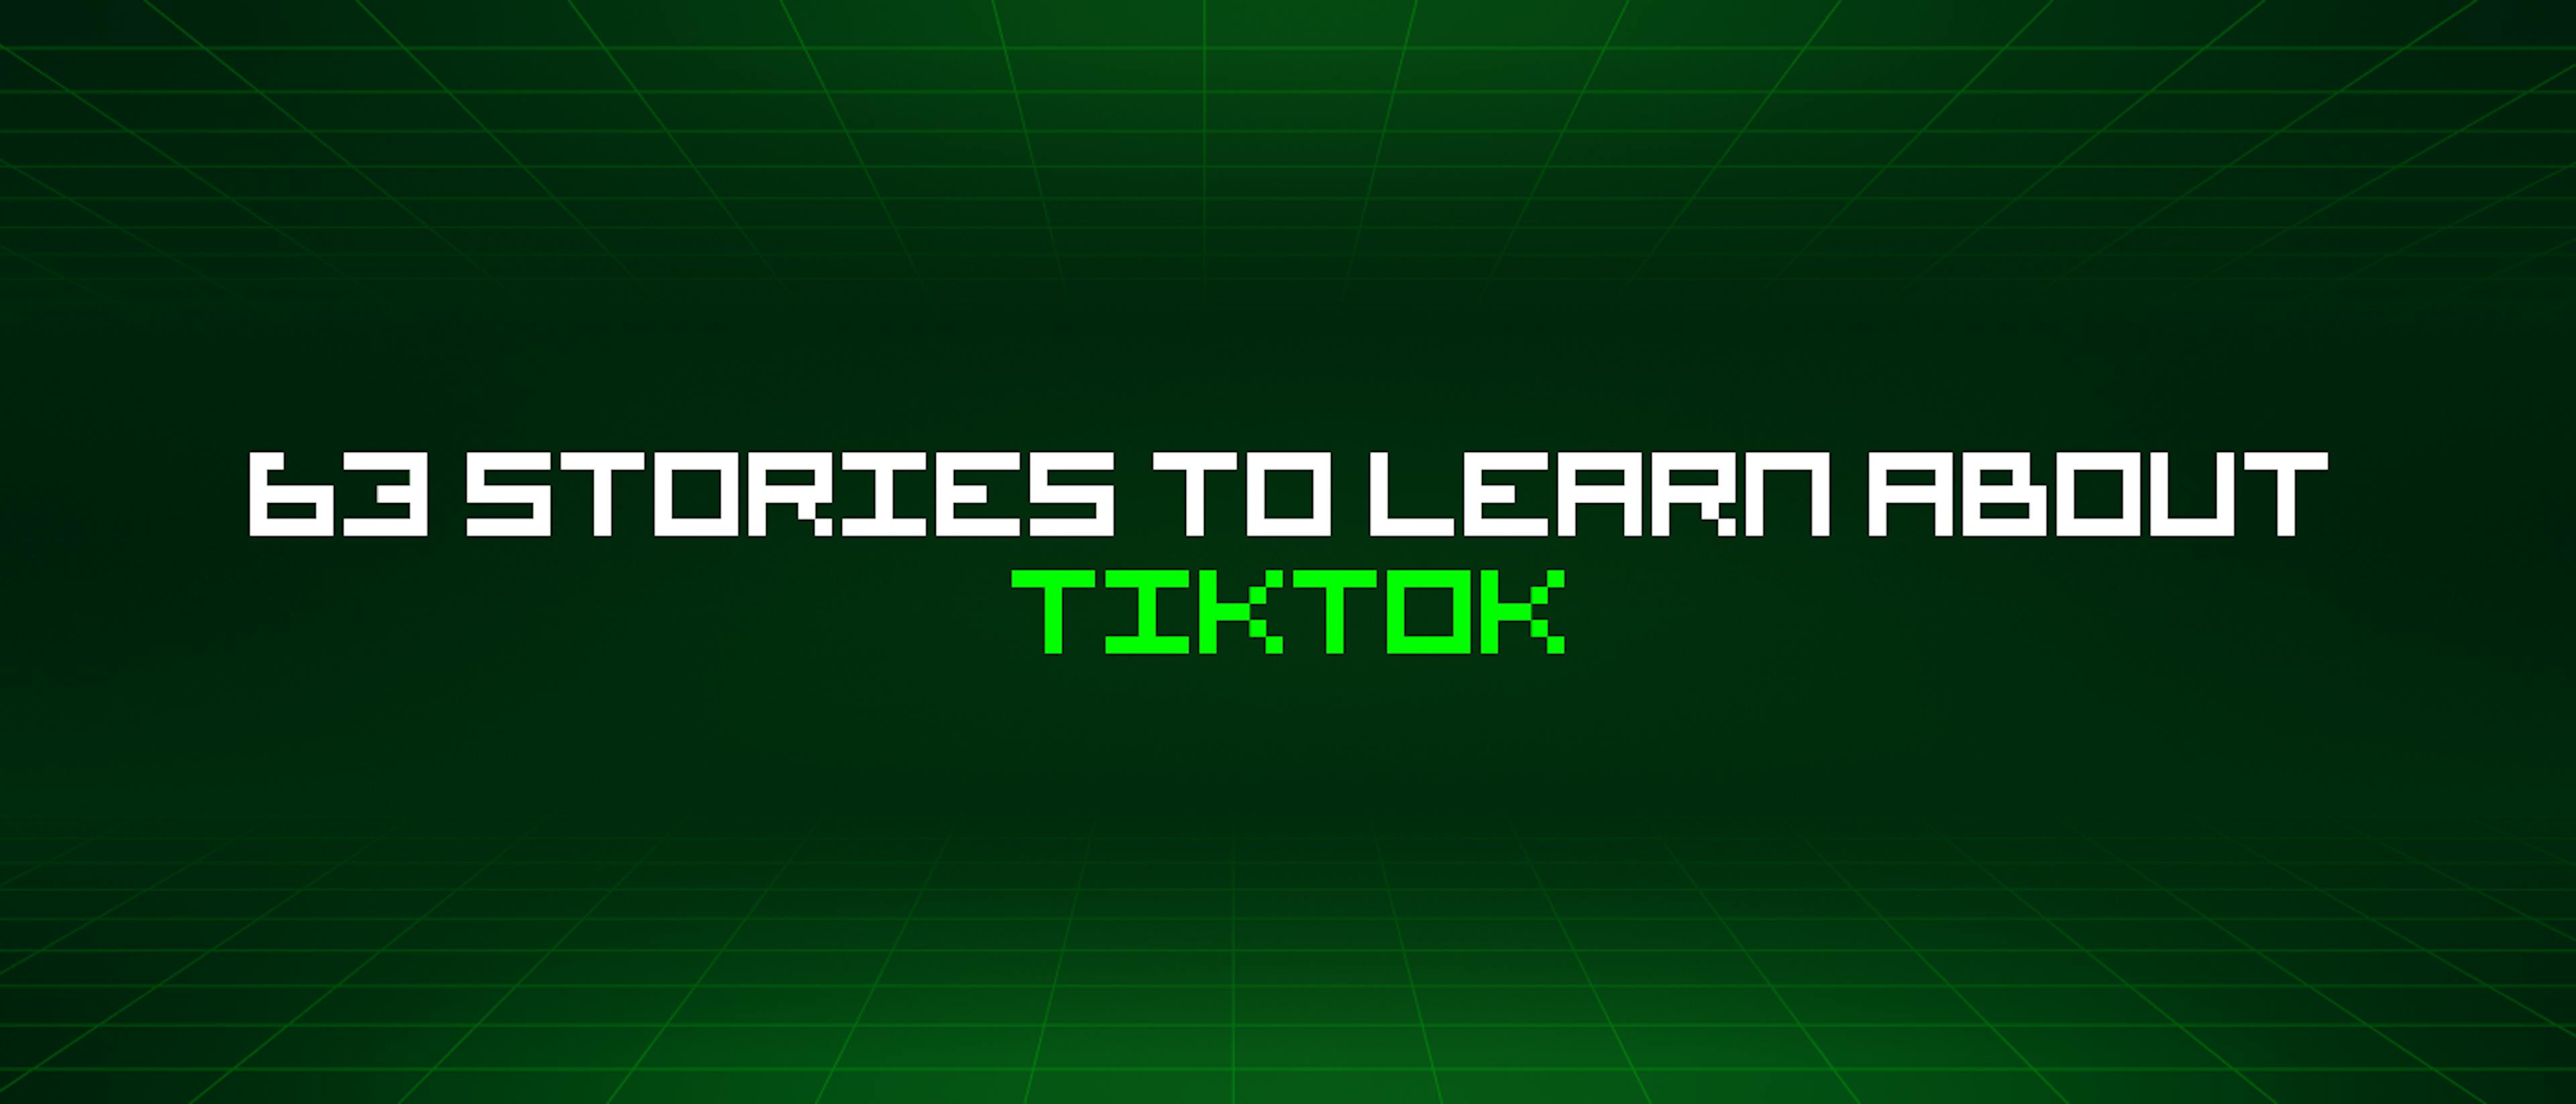 featured image - 63 Stories To Learn About Tiktok